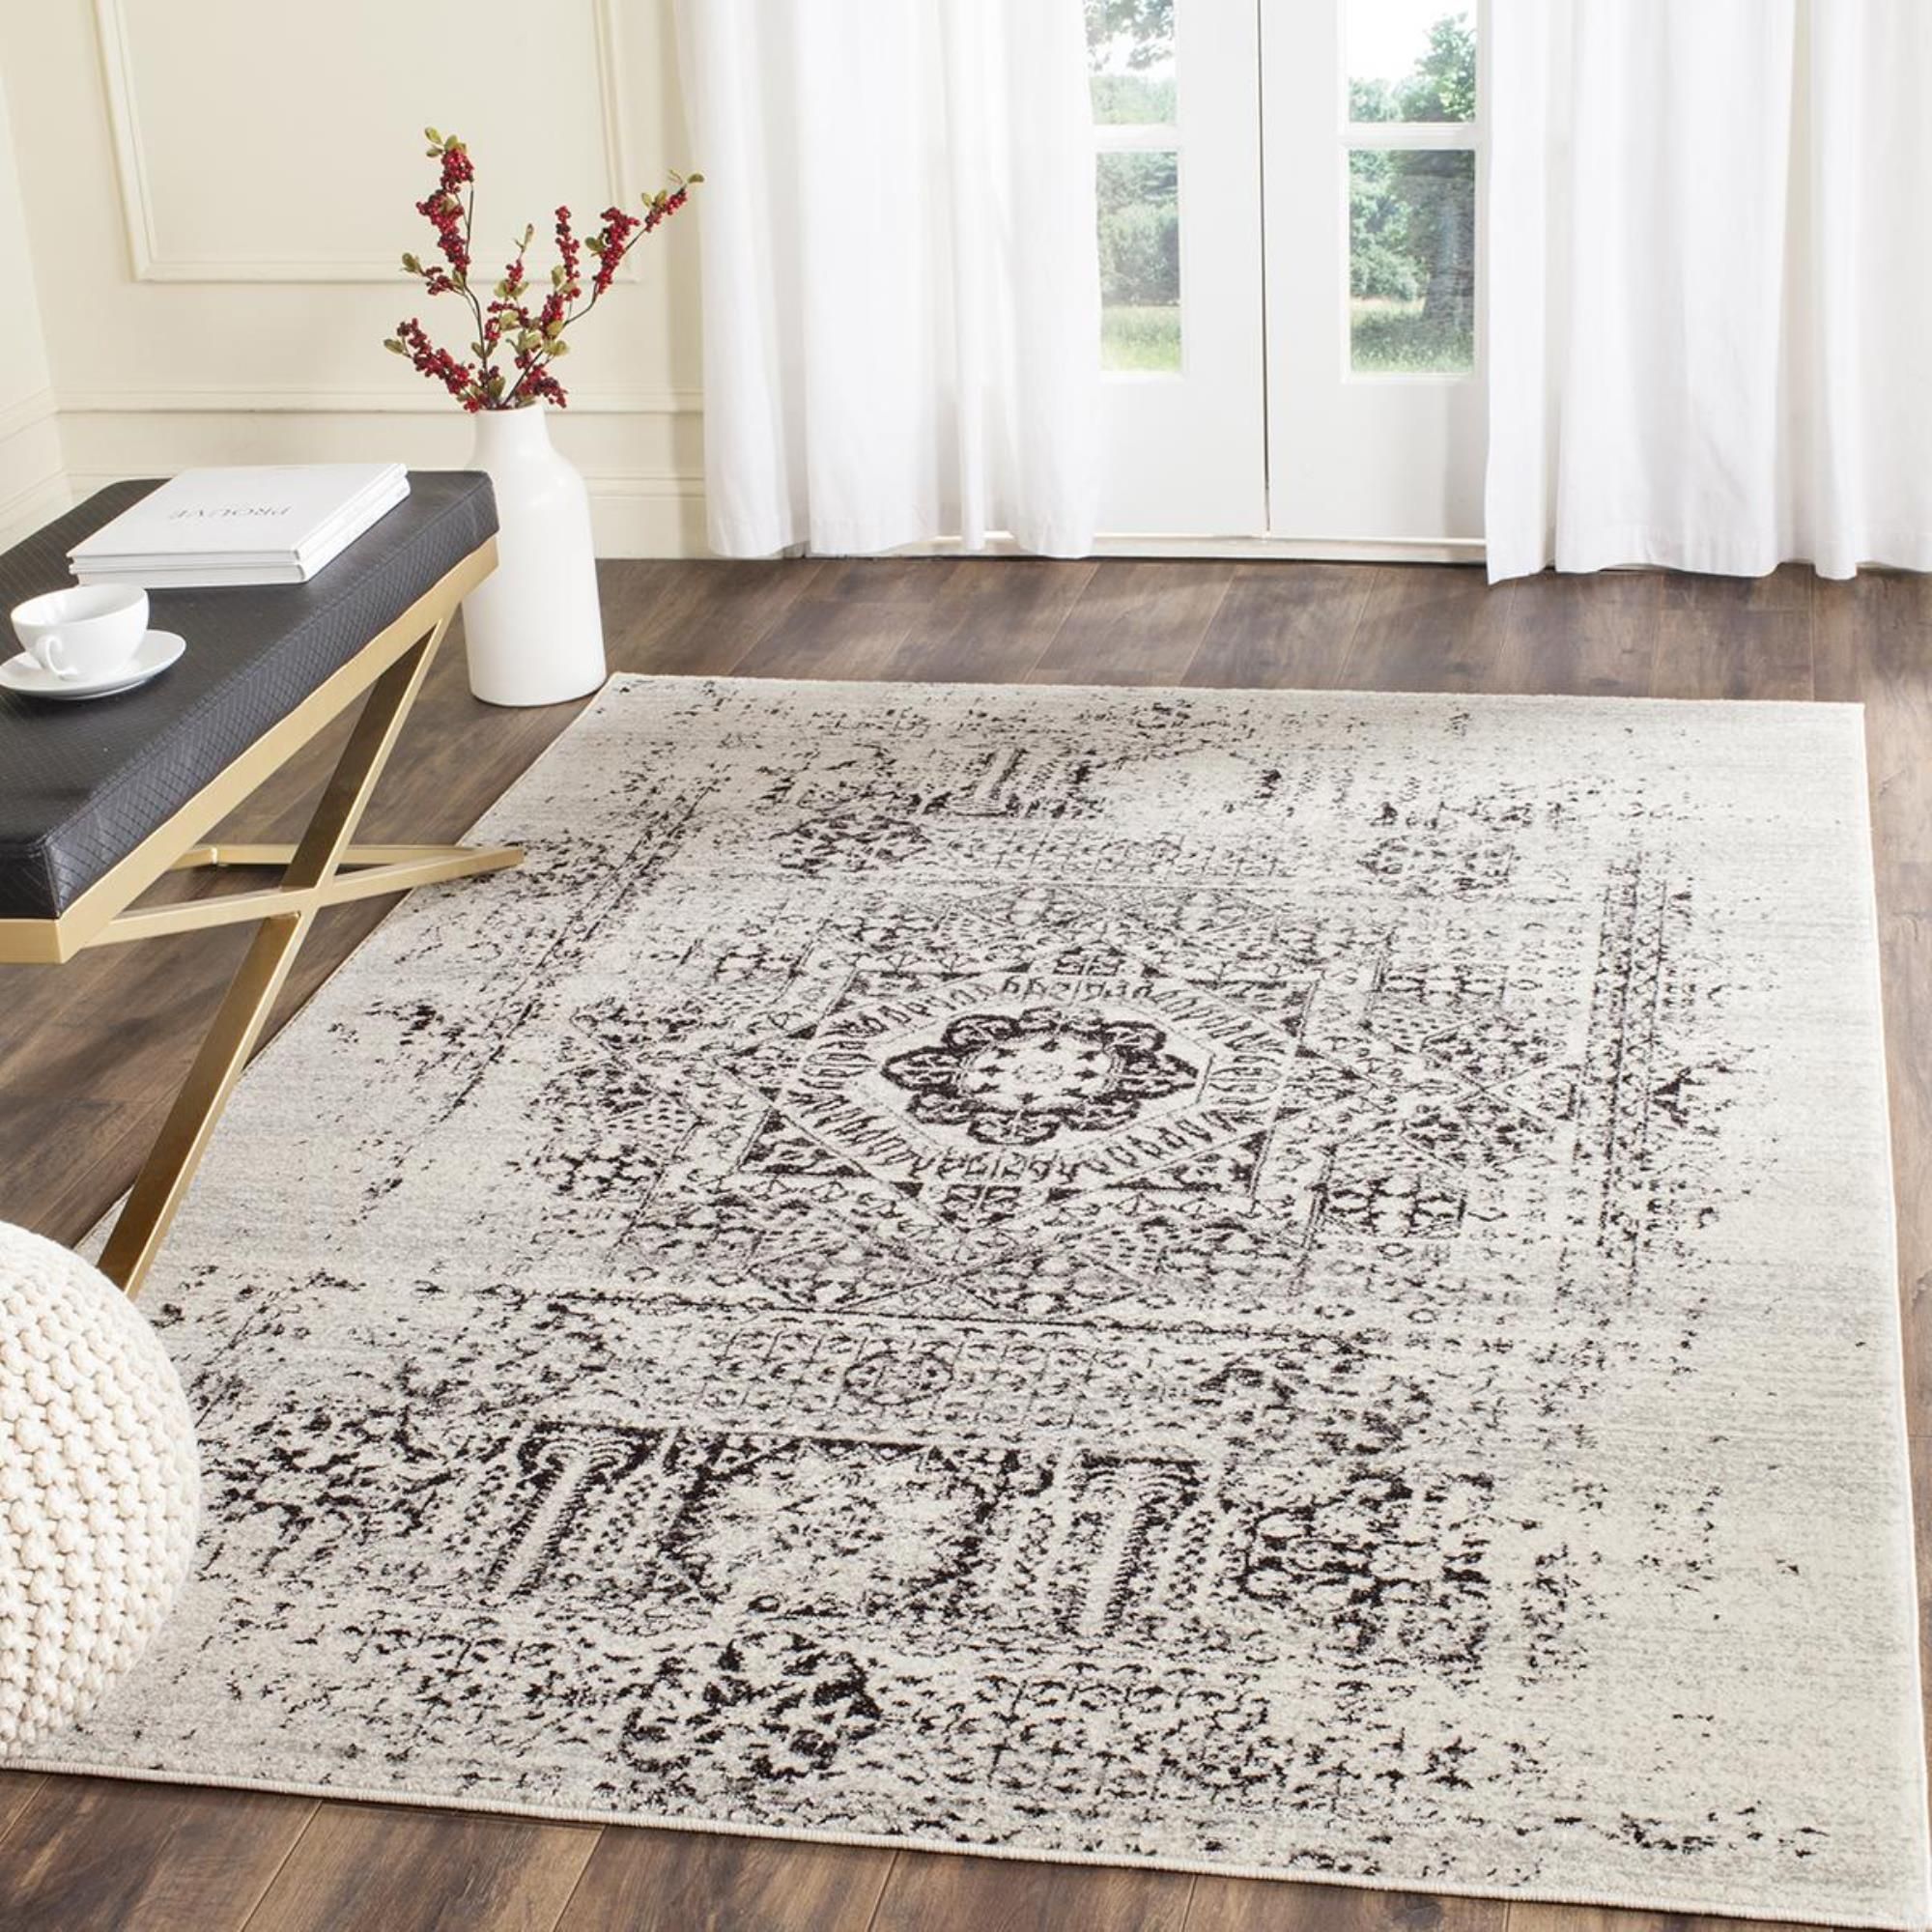 Safavieh Evoke Evk260t 4 4' X 6' Ivory/black Area Rug | Nfm Pertaining To Ivory And Black Rugs (View 7 of 15)